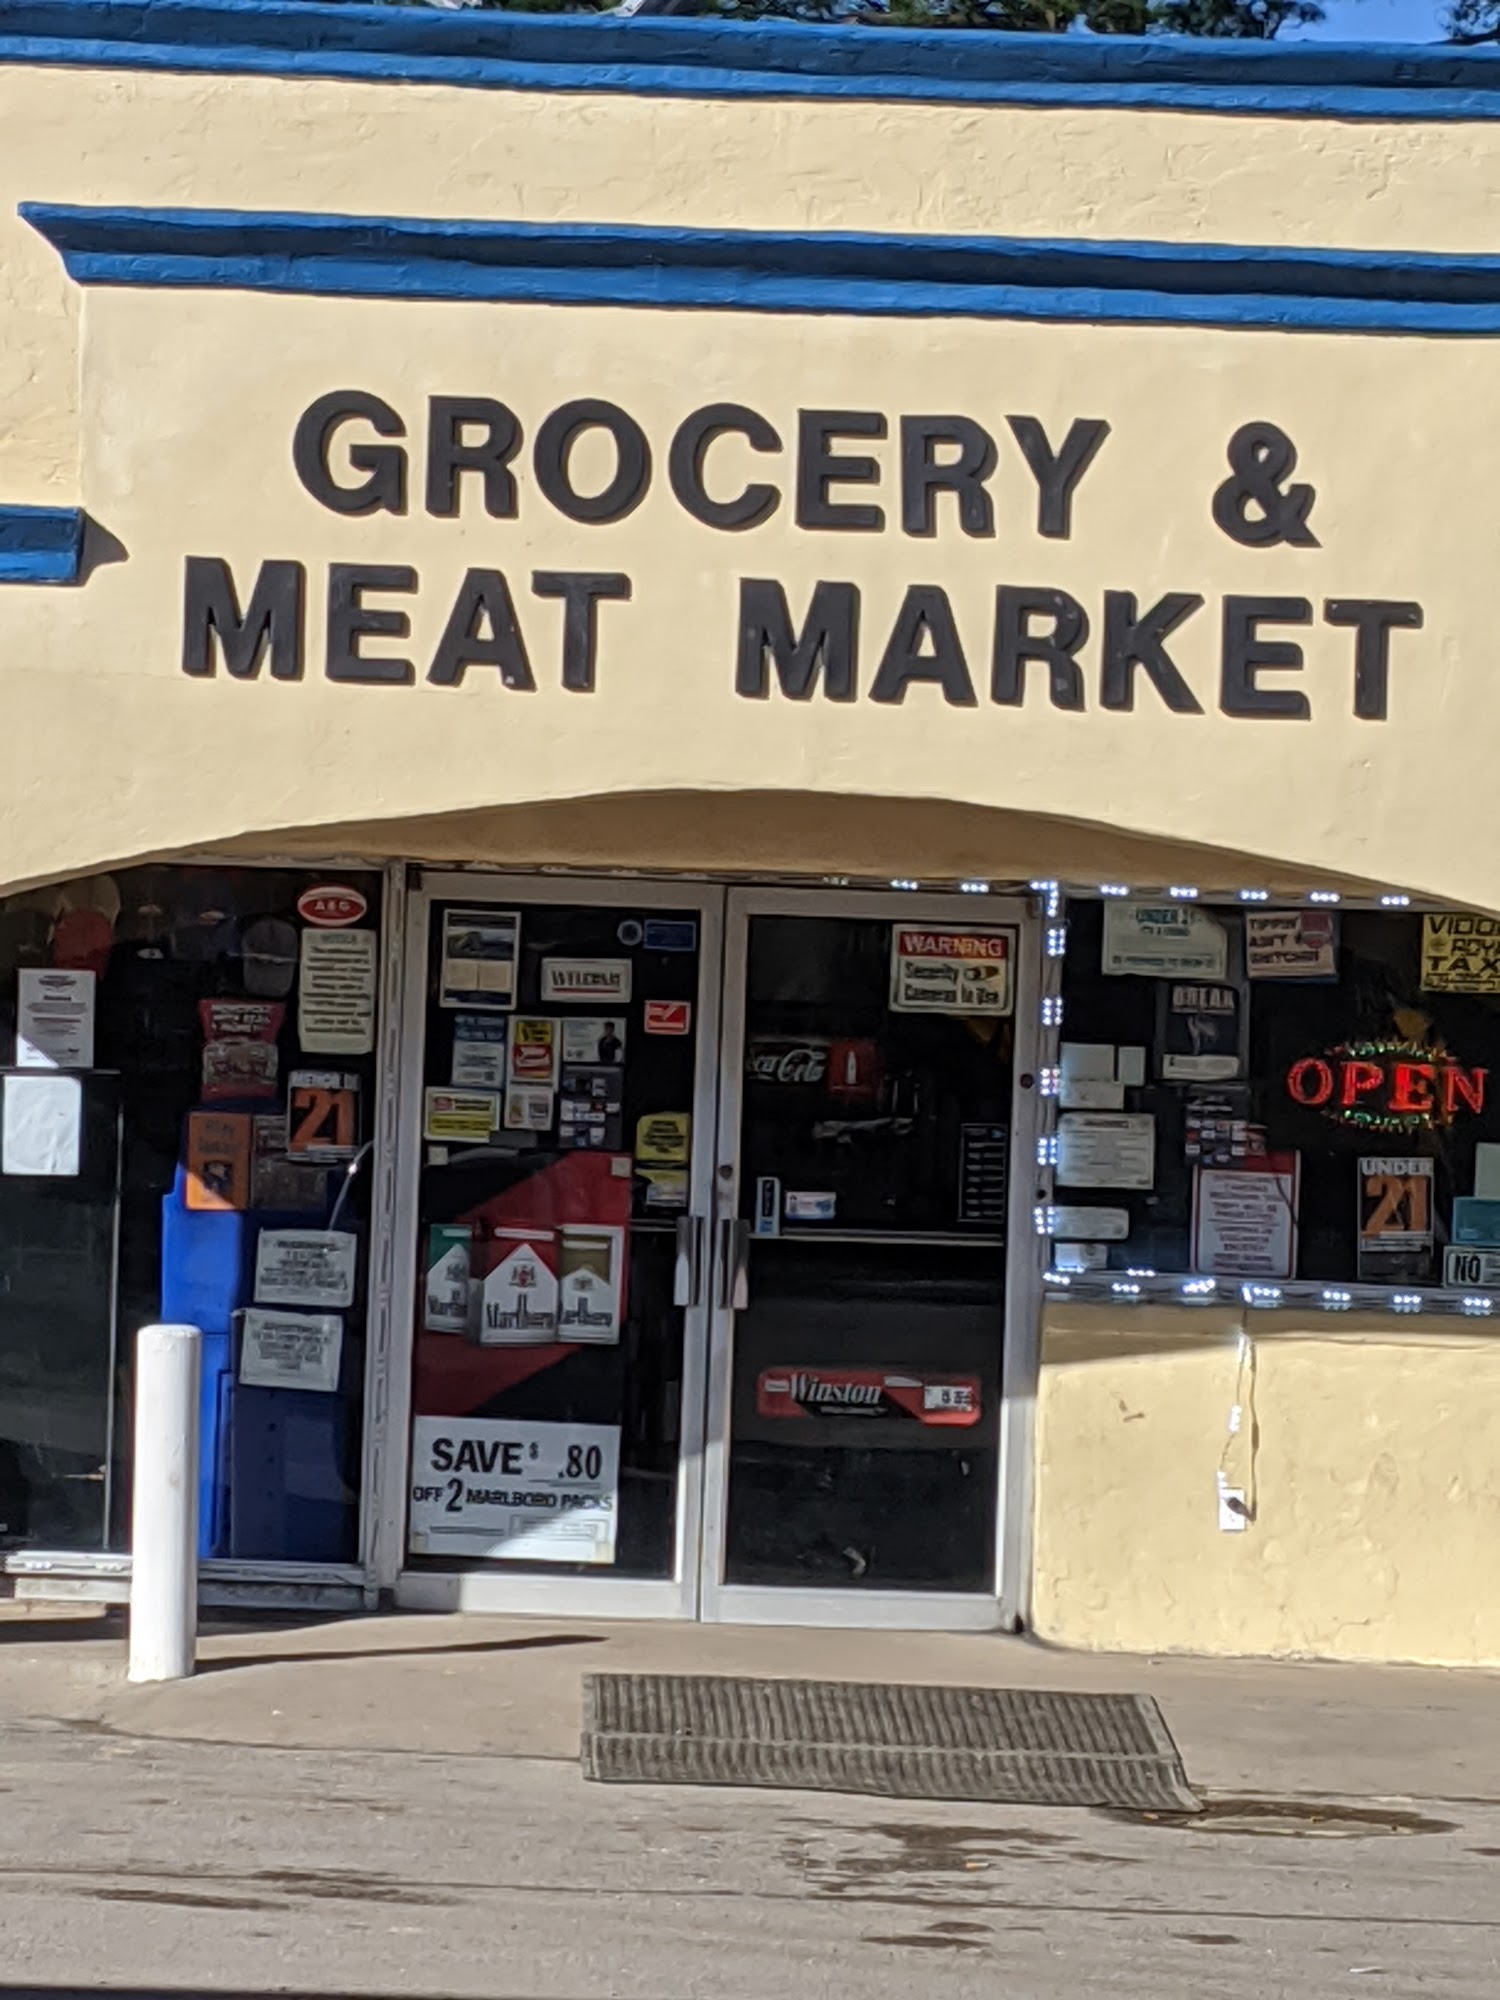 The Falls Grocery & Meat Market